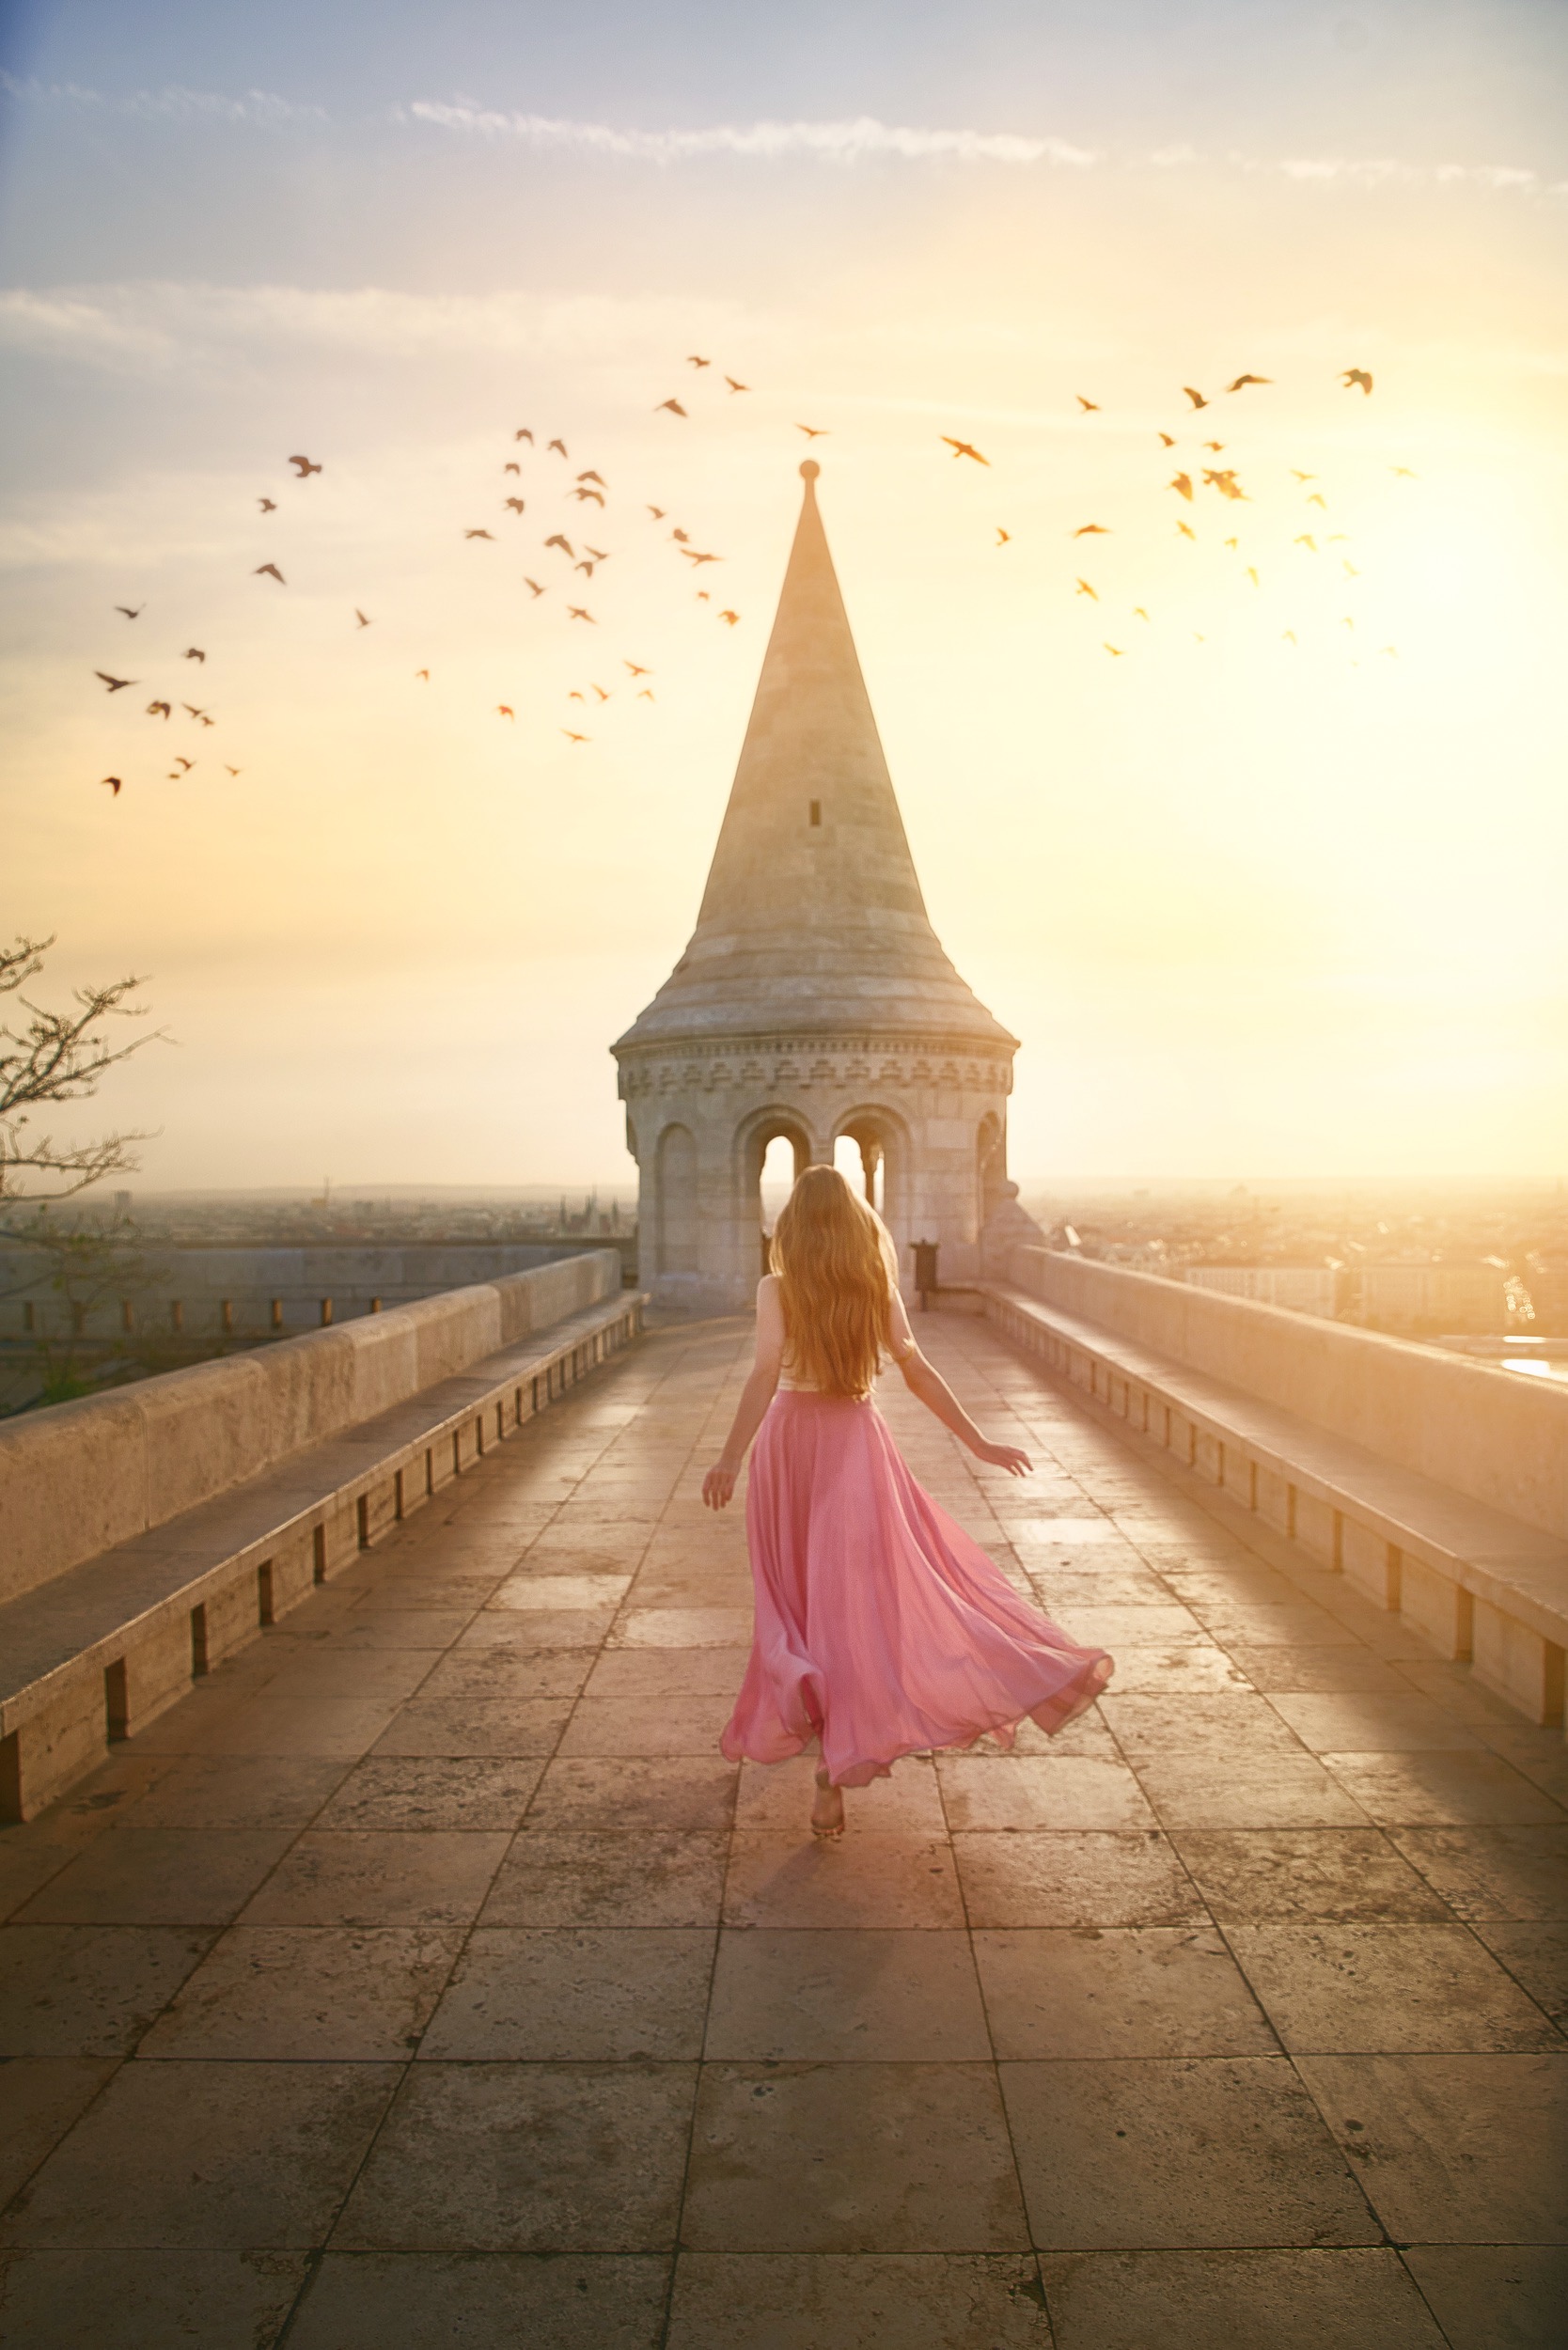 a woman in a long dress is running barefoot across a bridge to a steeple, there are many birds in the sky above her, one of the best places to visit in Europe in July 